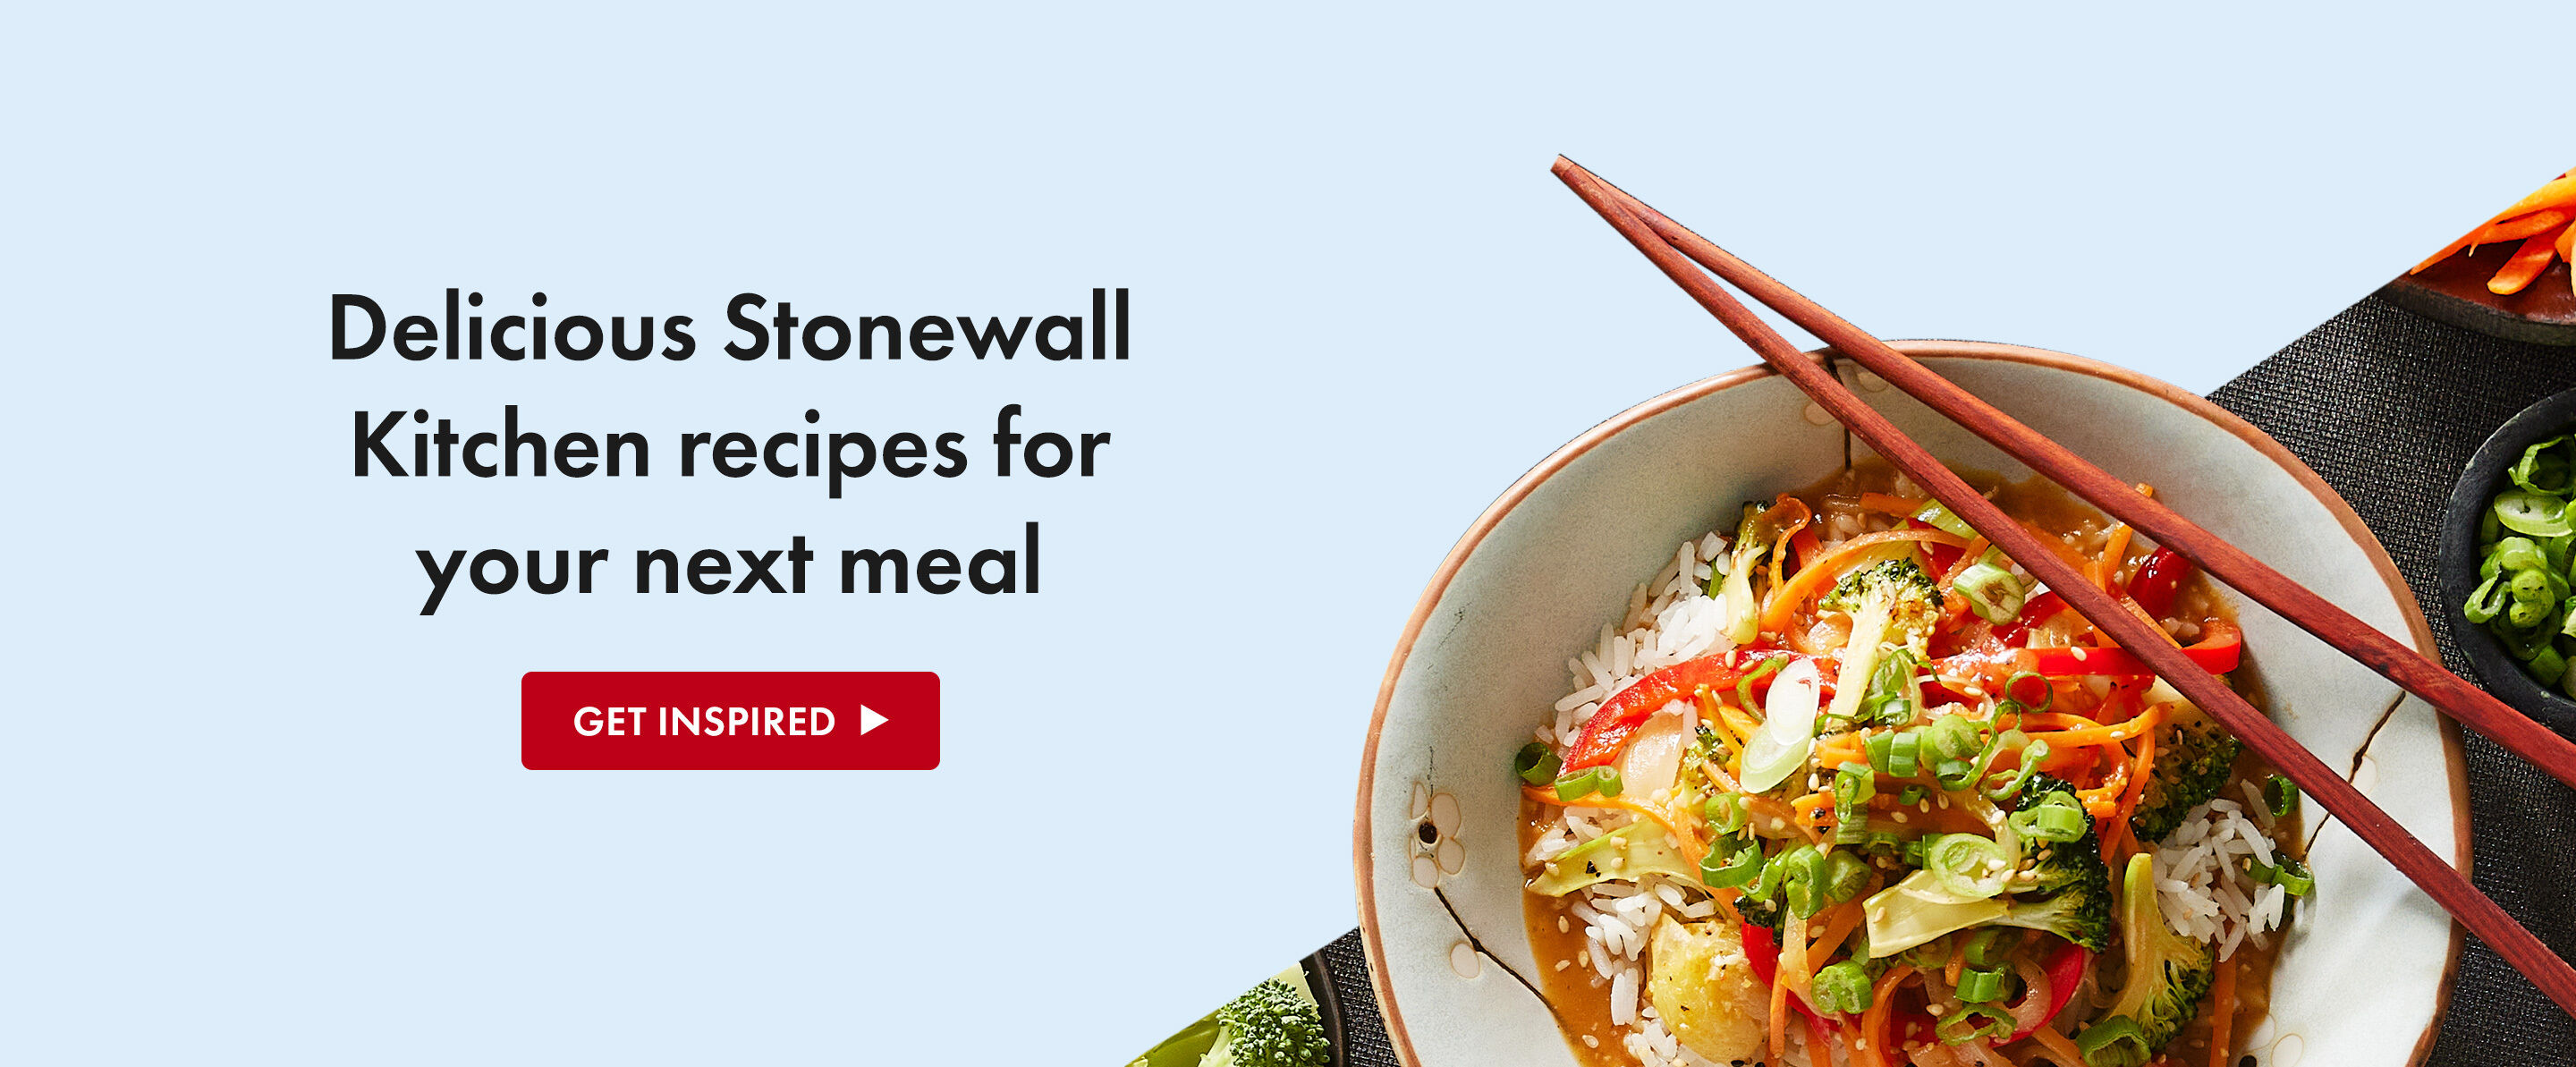 Delicious Stonewall Kitchen recipes for your next meal | Get Inspired